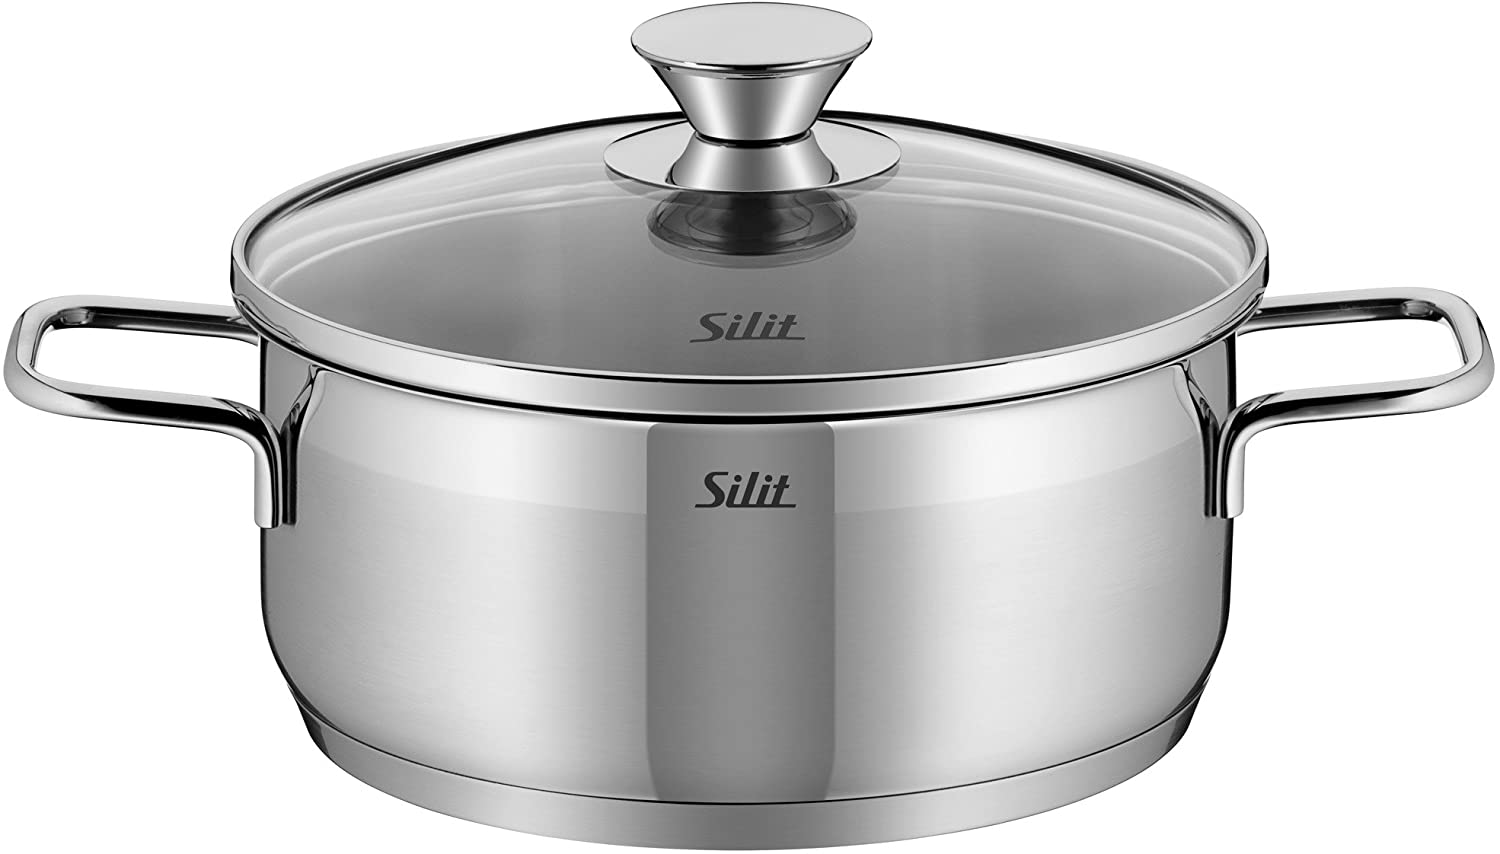 Silit Pisa Cooking Pot Pouring Rim Glass Lid Polished Stainless Steel Suitable for Induction Cookers Dishwasher Safe, Ø 20 cm